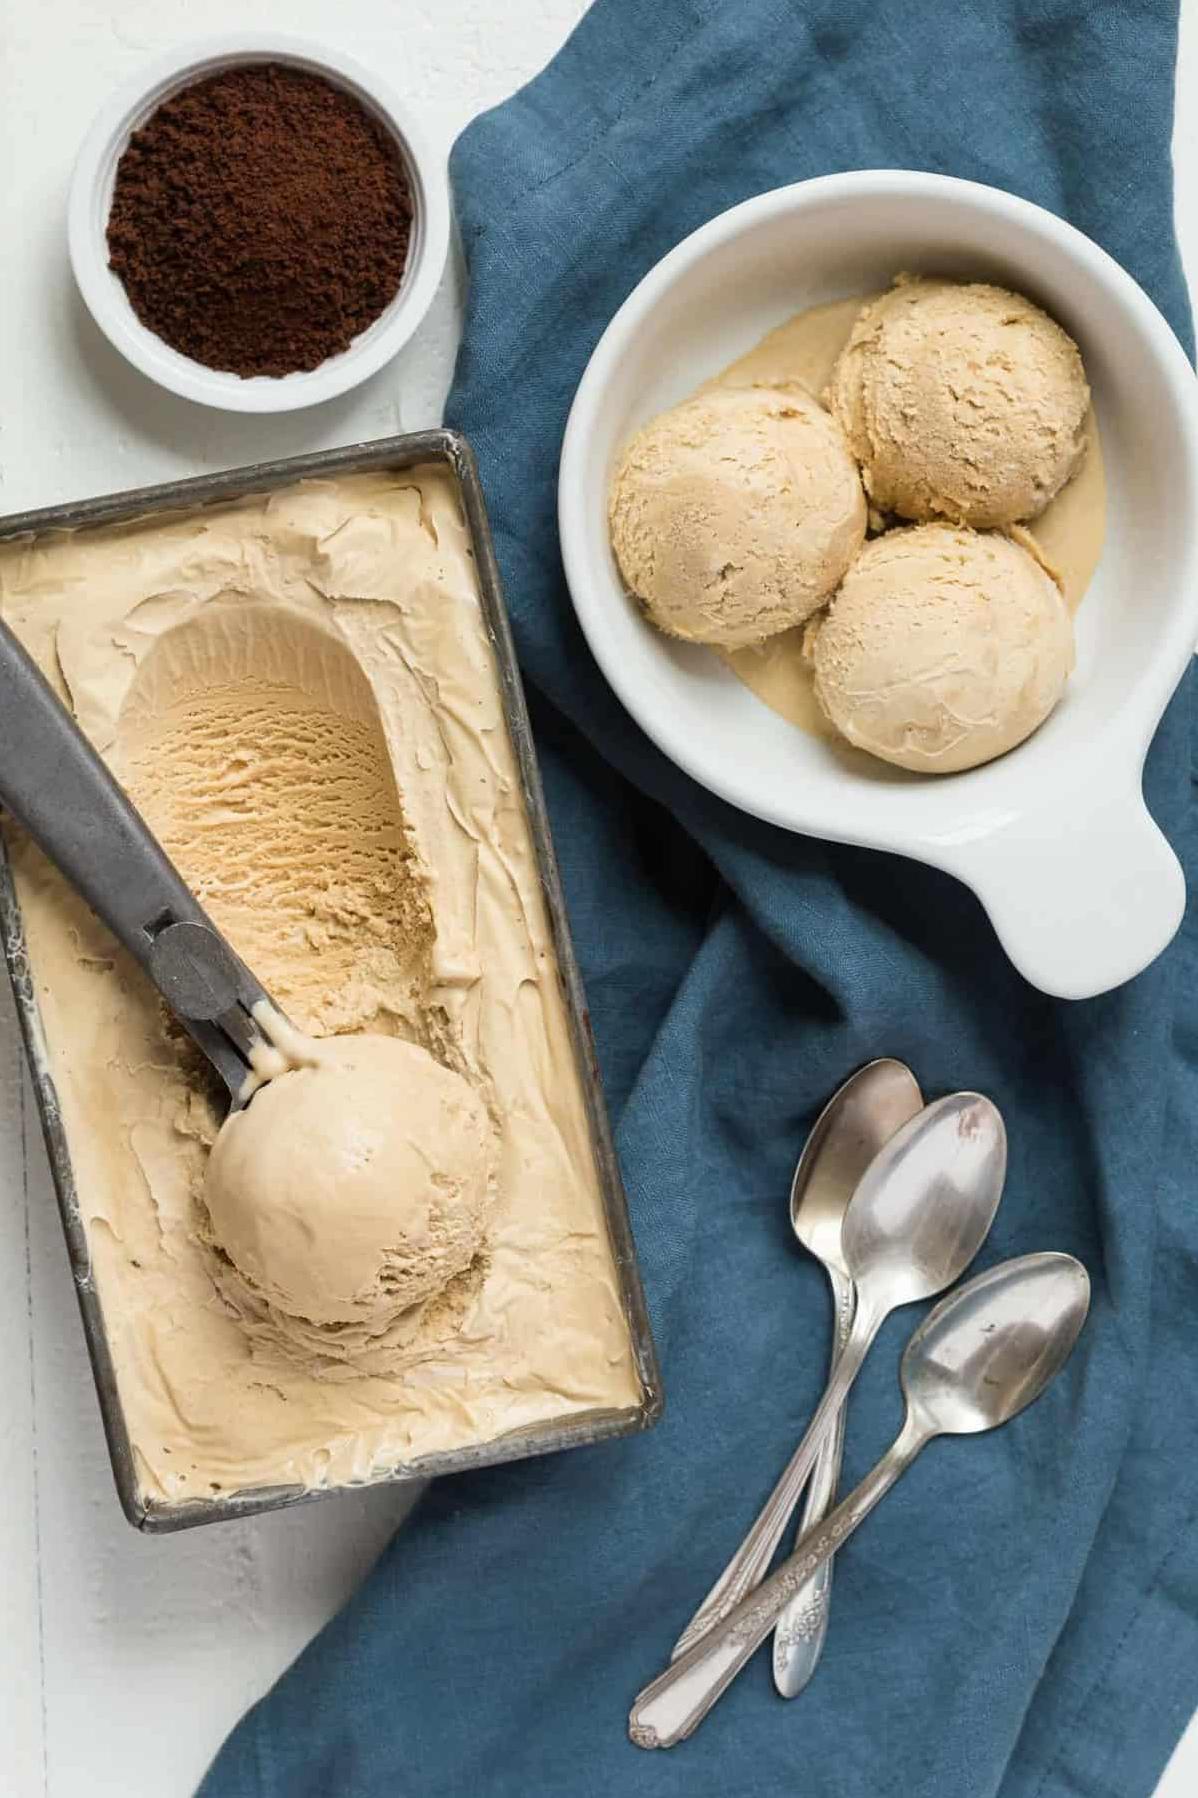  Summer's calling and this coffee ice cream recipe is the answer!